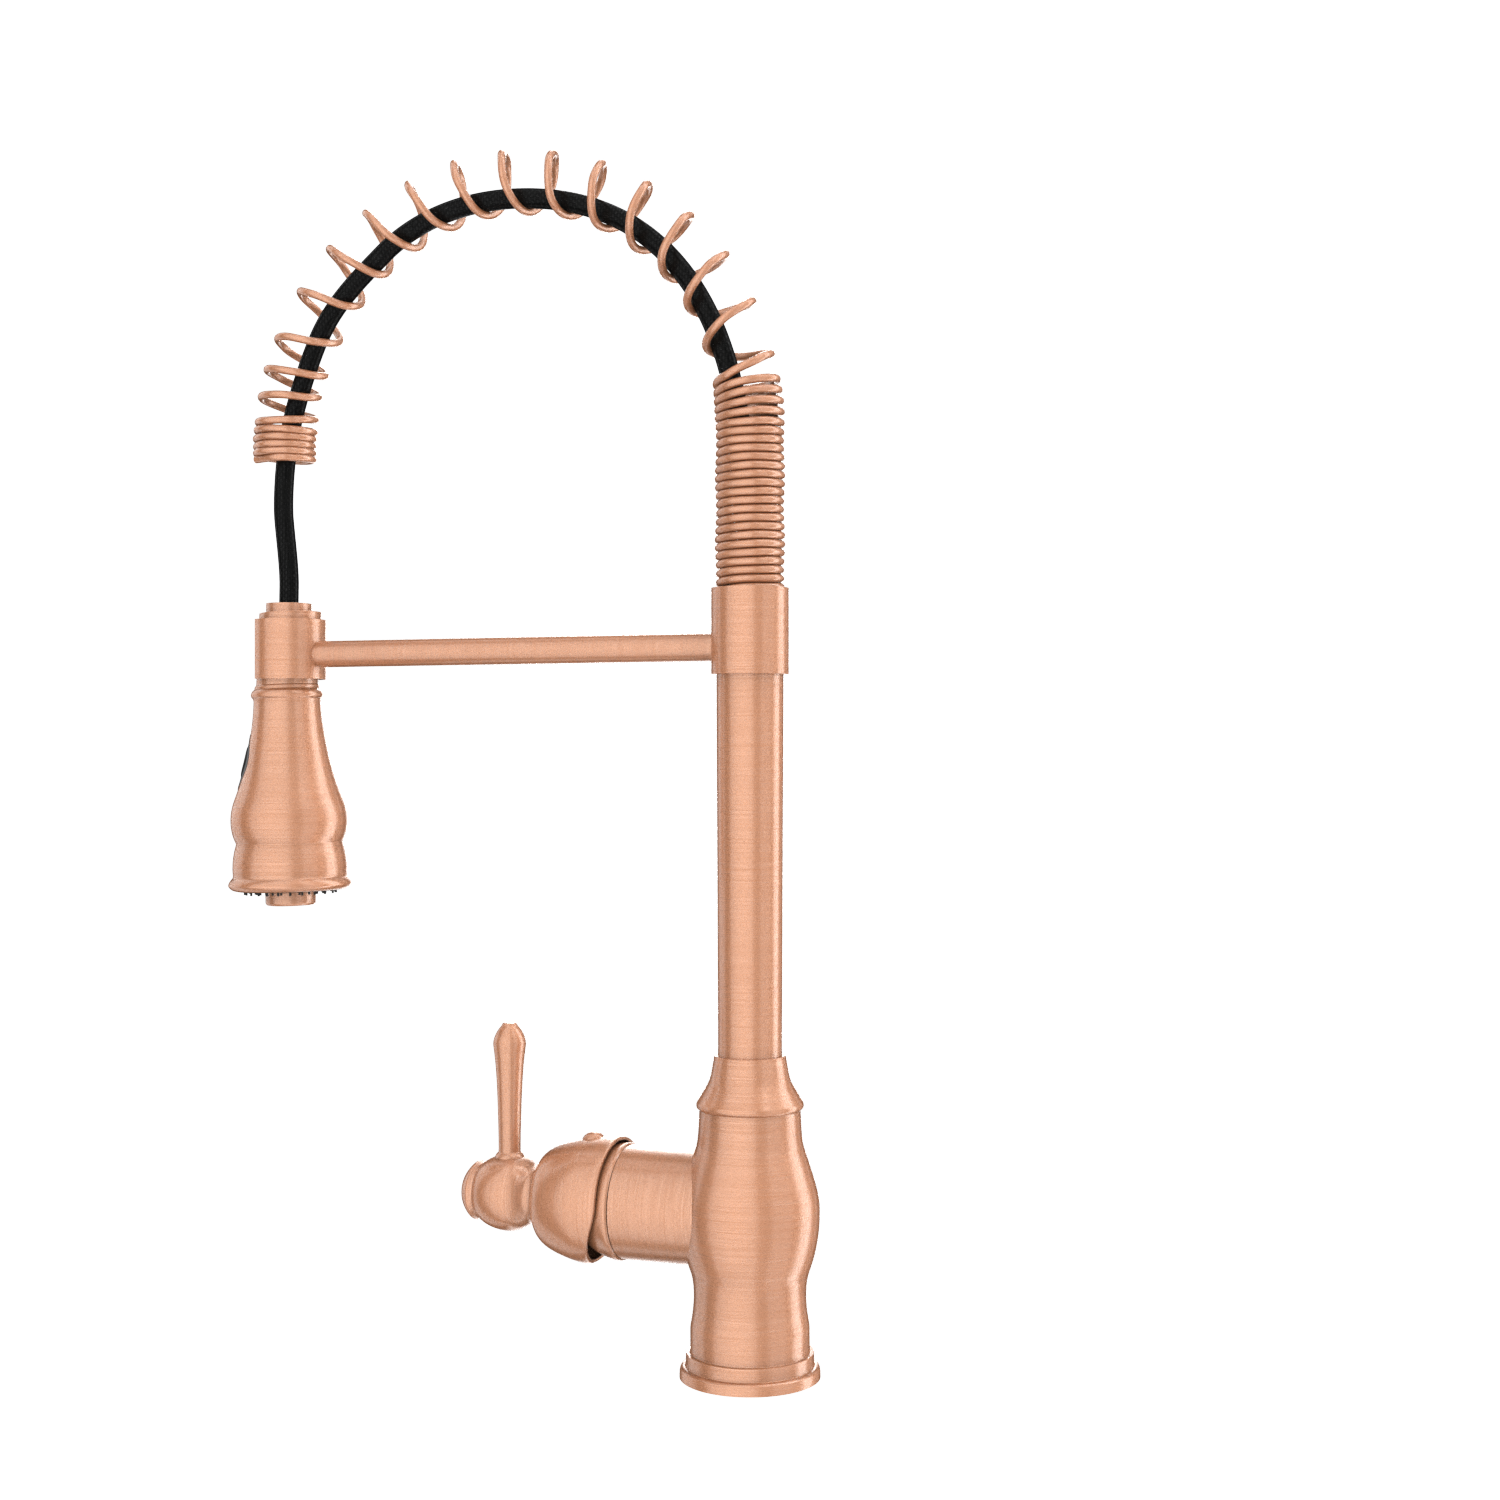 Copper Pre-Rinse Spring Kitchen Faucet, Single Level Solid Brass Kitchen Sink Faucets with Pull Down Sprayer - AK96518C